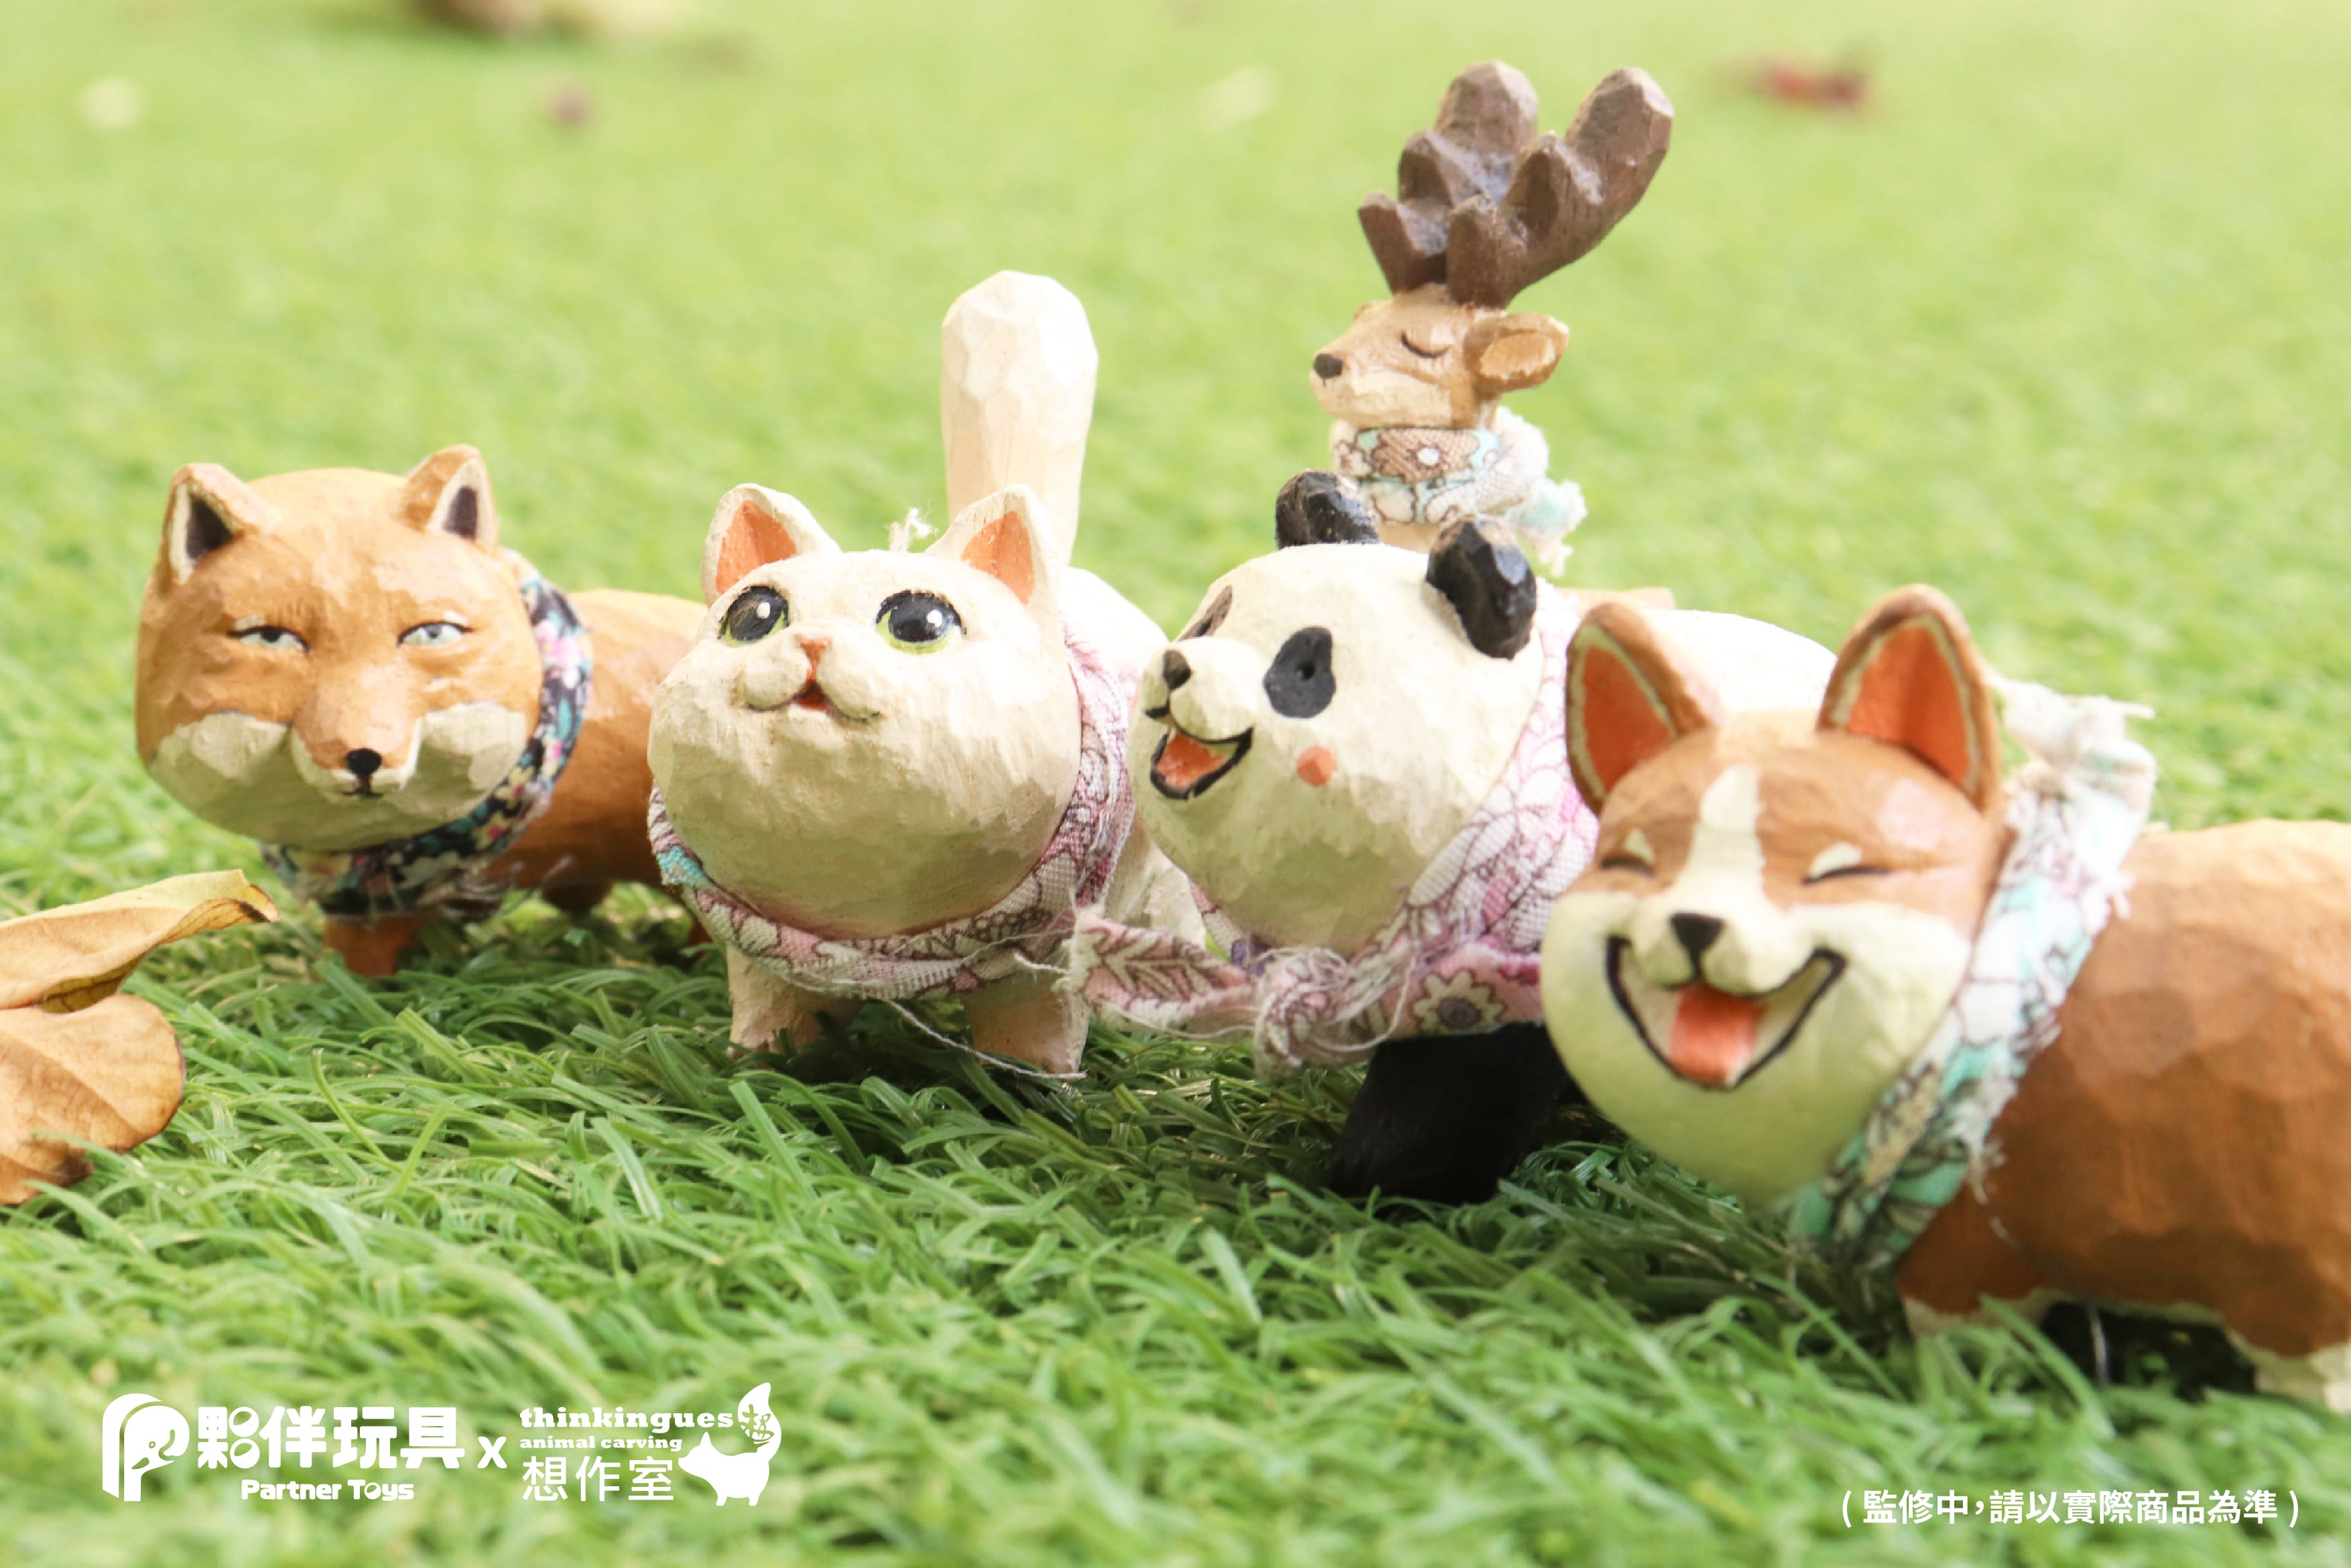 Carving Zoo Gacha Series 2 by Thinkingues Animal Carving